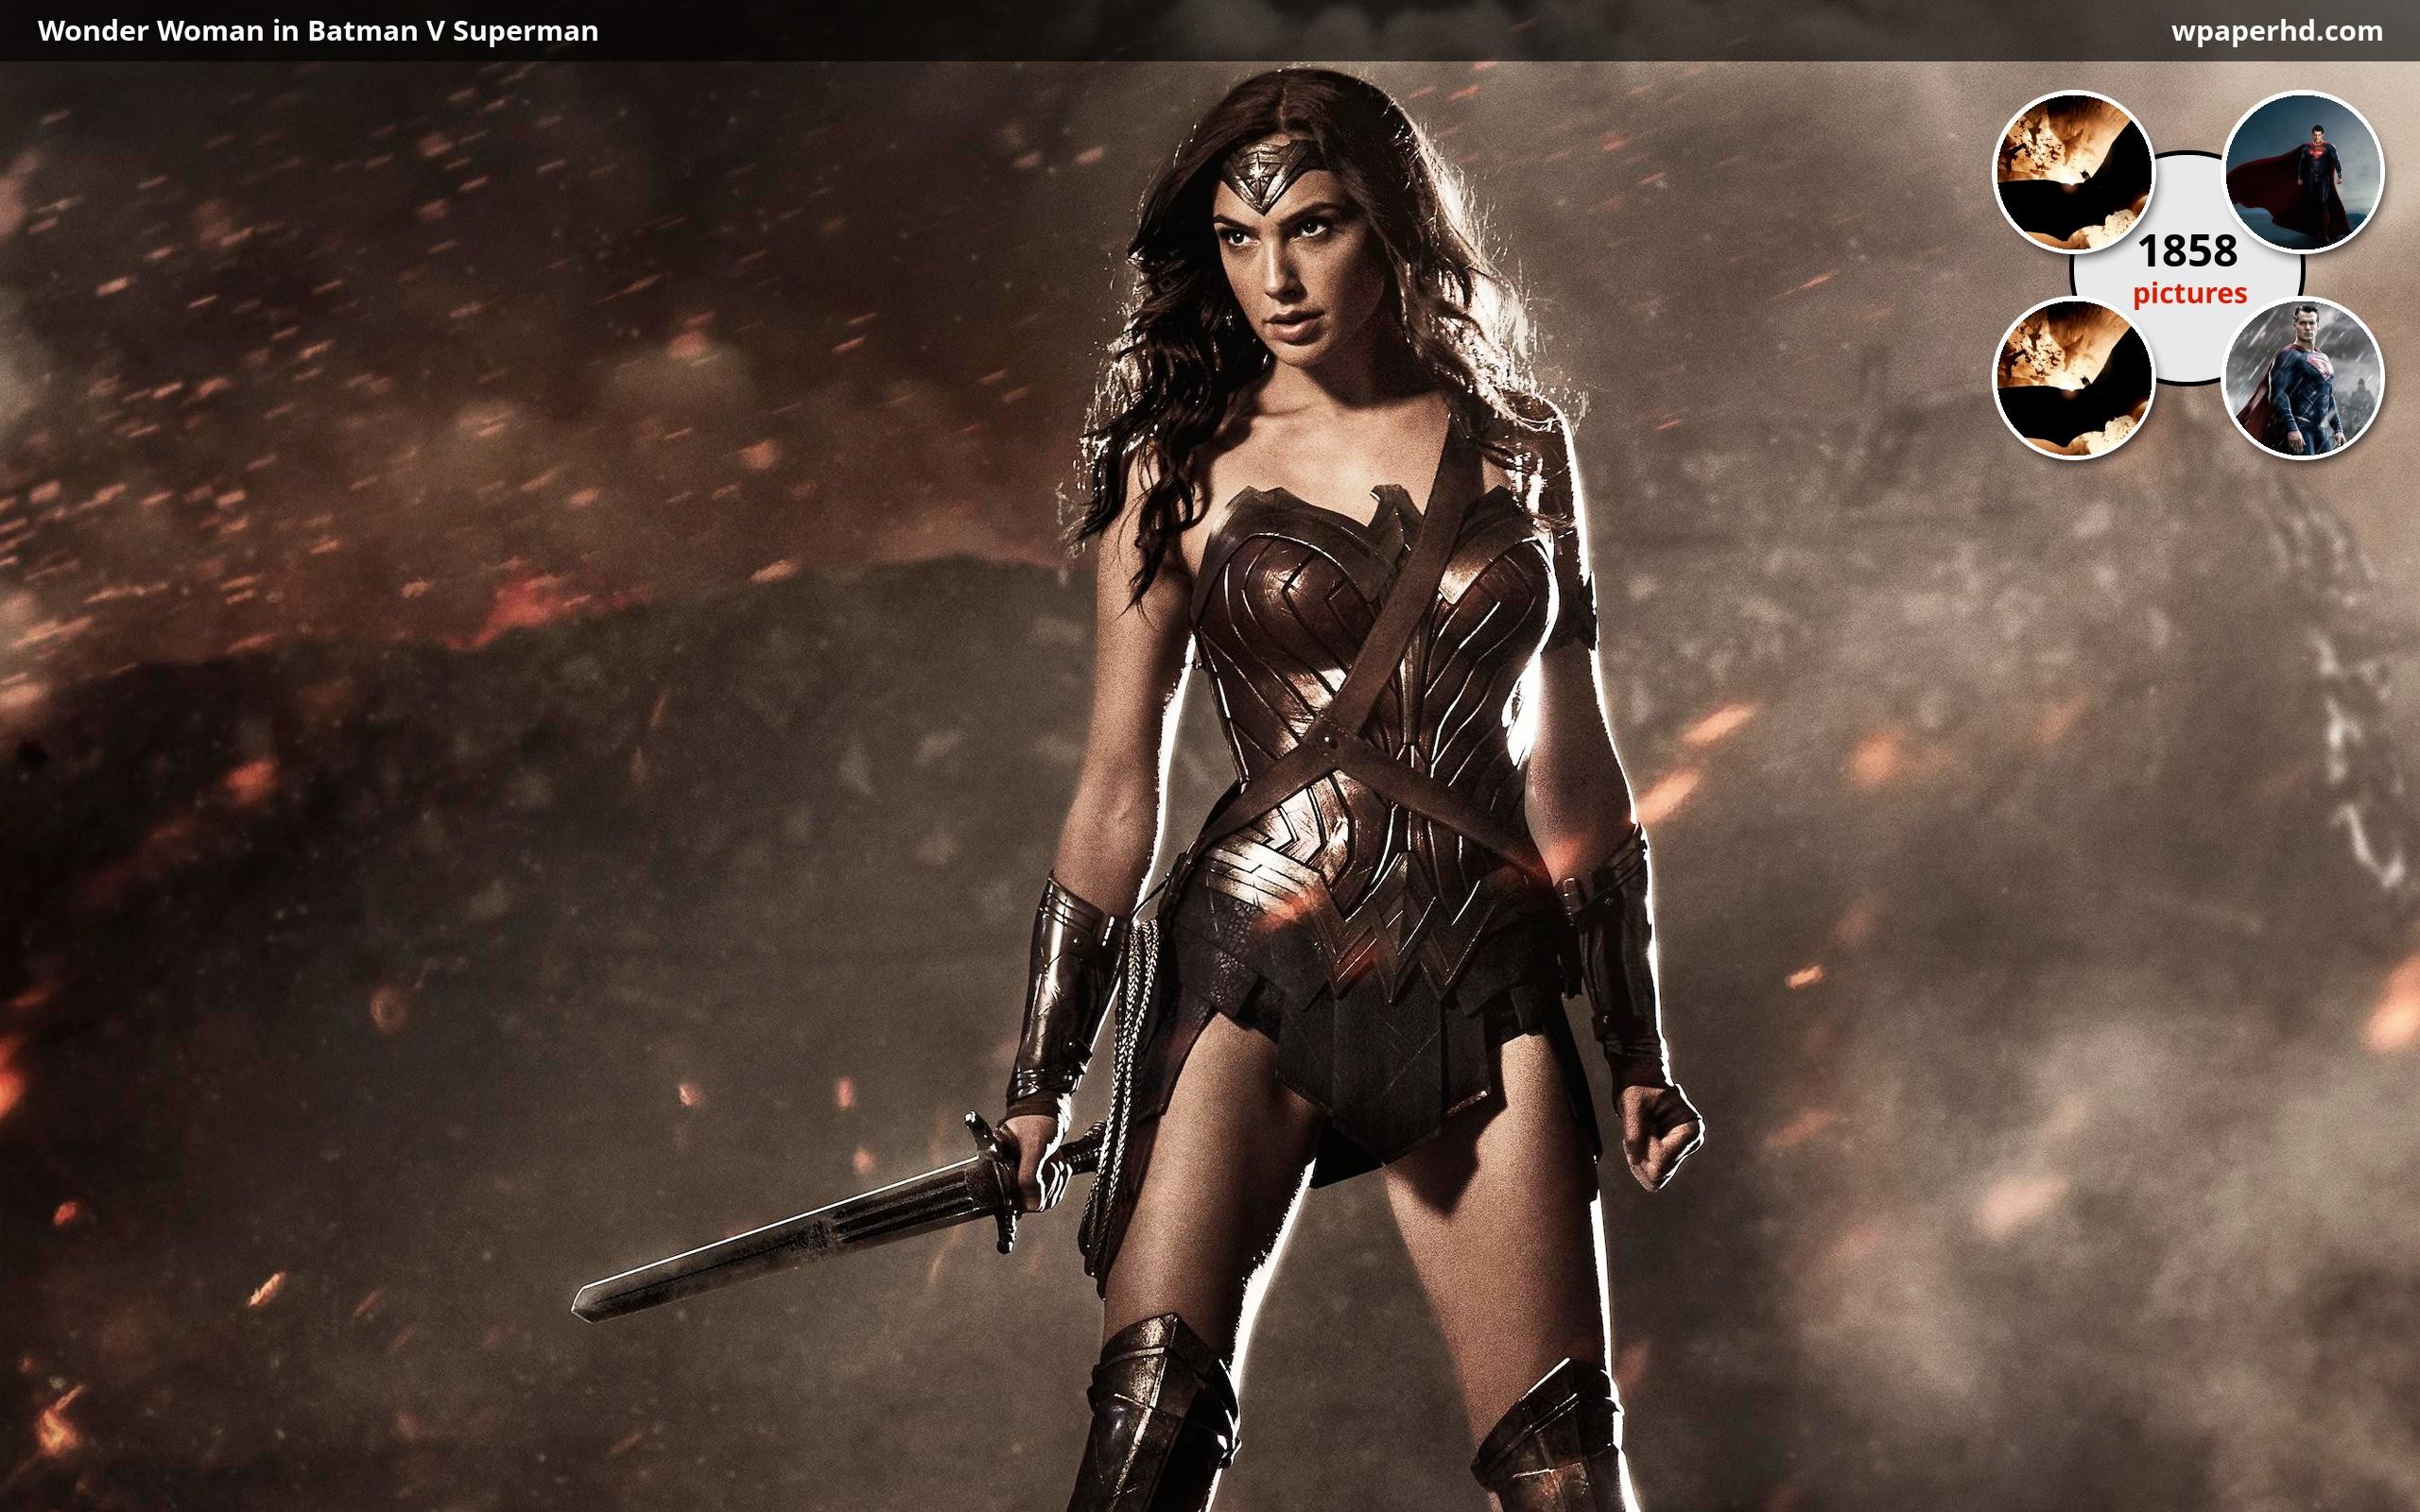 2560x1600 Description Wonder Woman in Batman V Superman wallpaper from Movies  category. You are on page with Wonder Woman in Batman V Superman wallpaper  ...